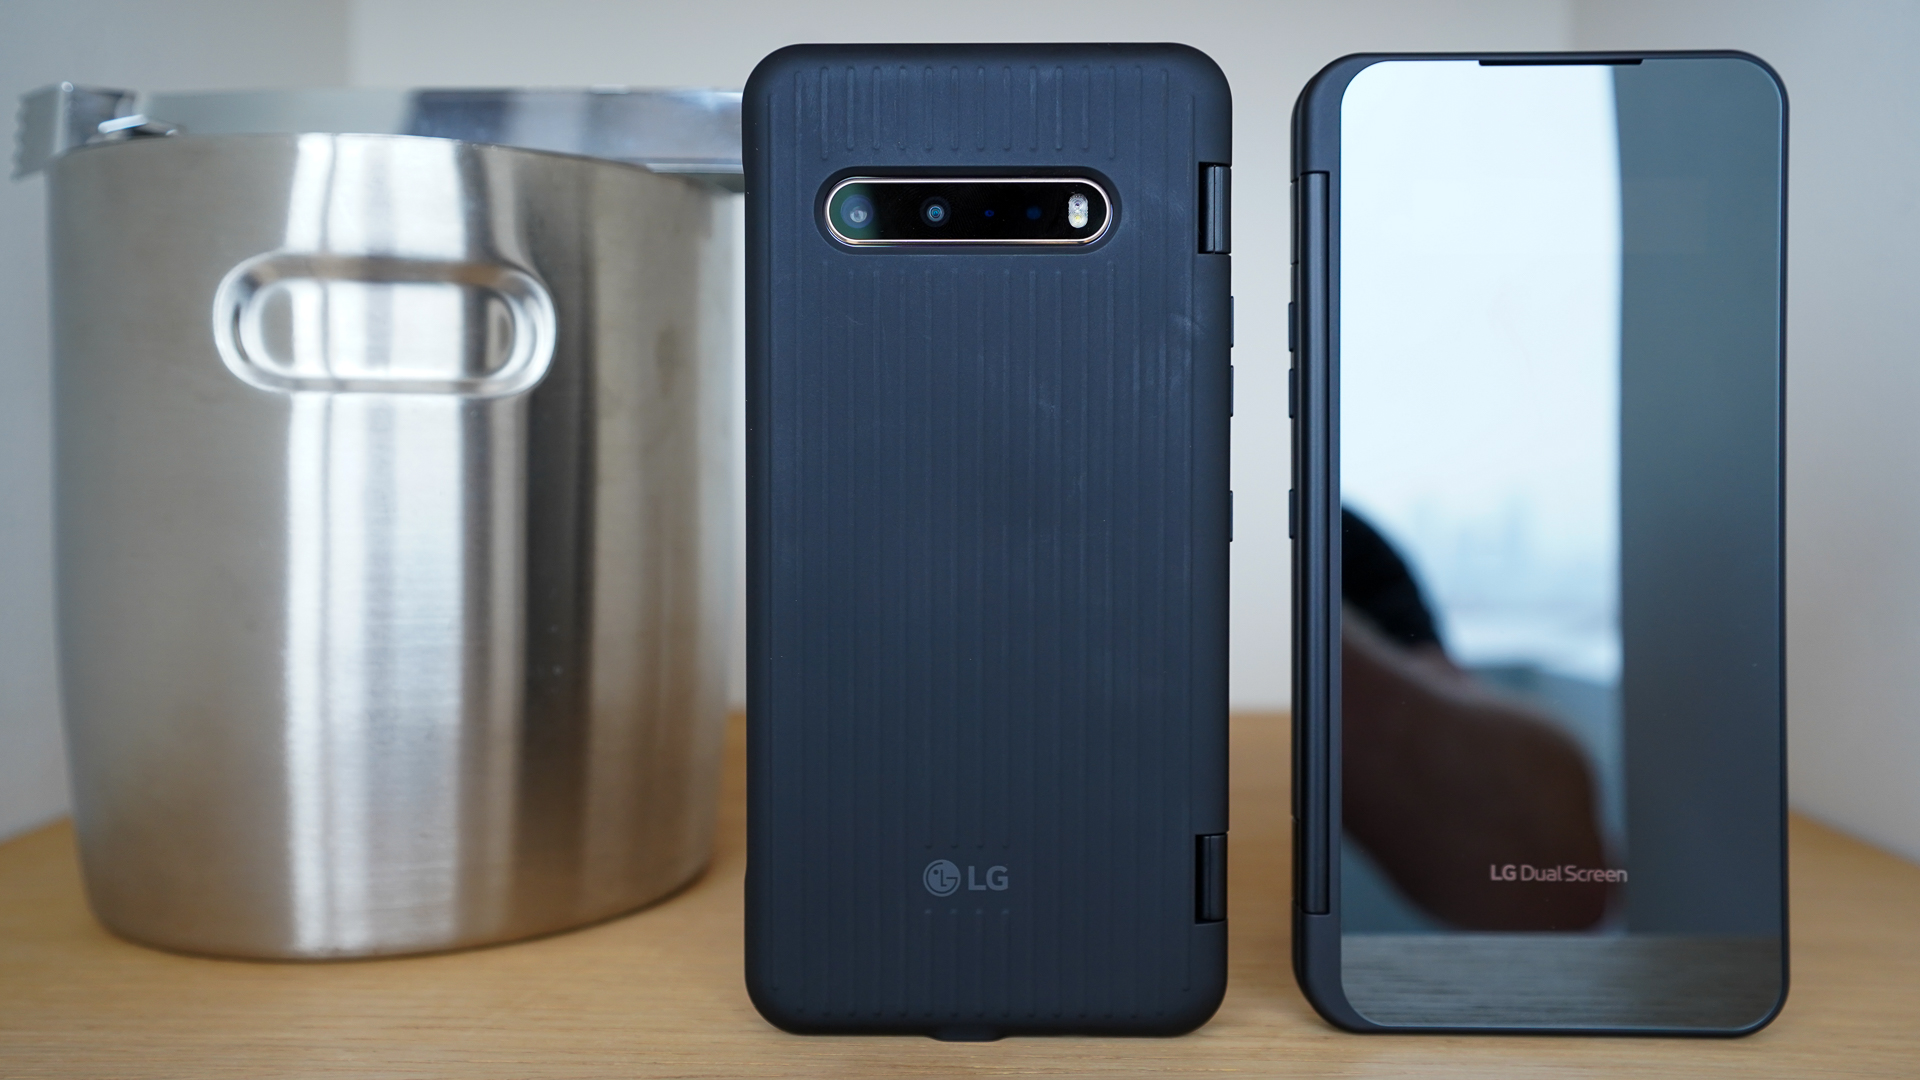 LG V60 ThinQ 5G dusal display front and back